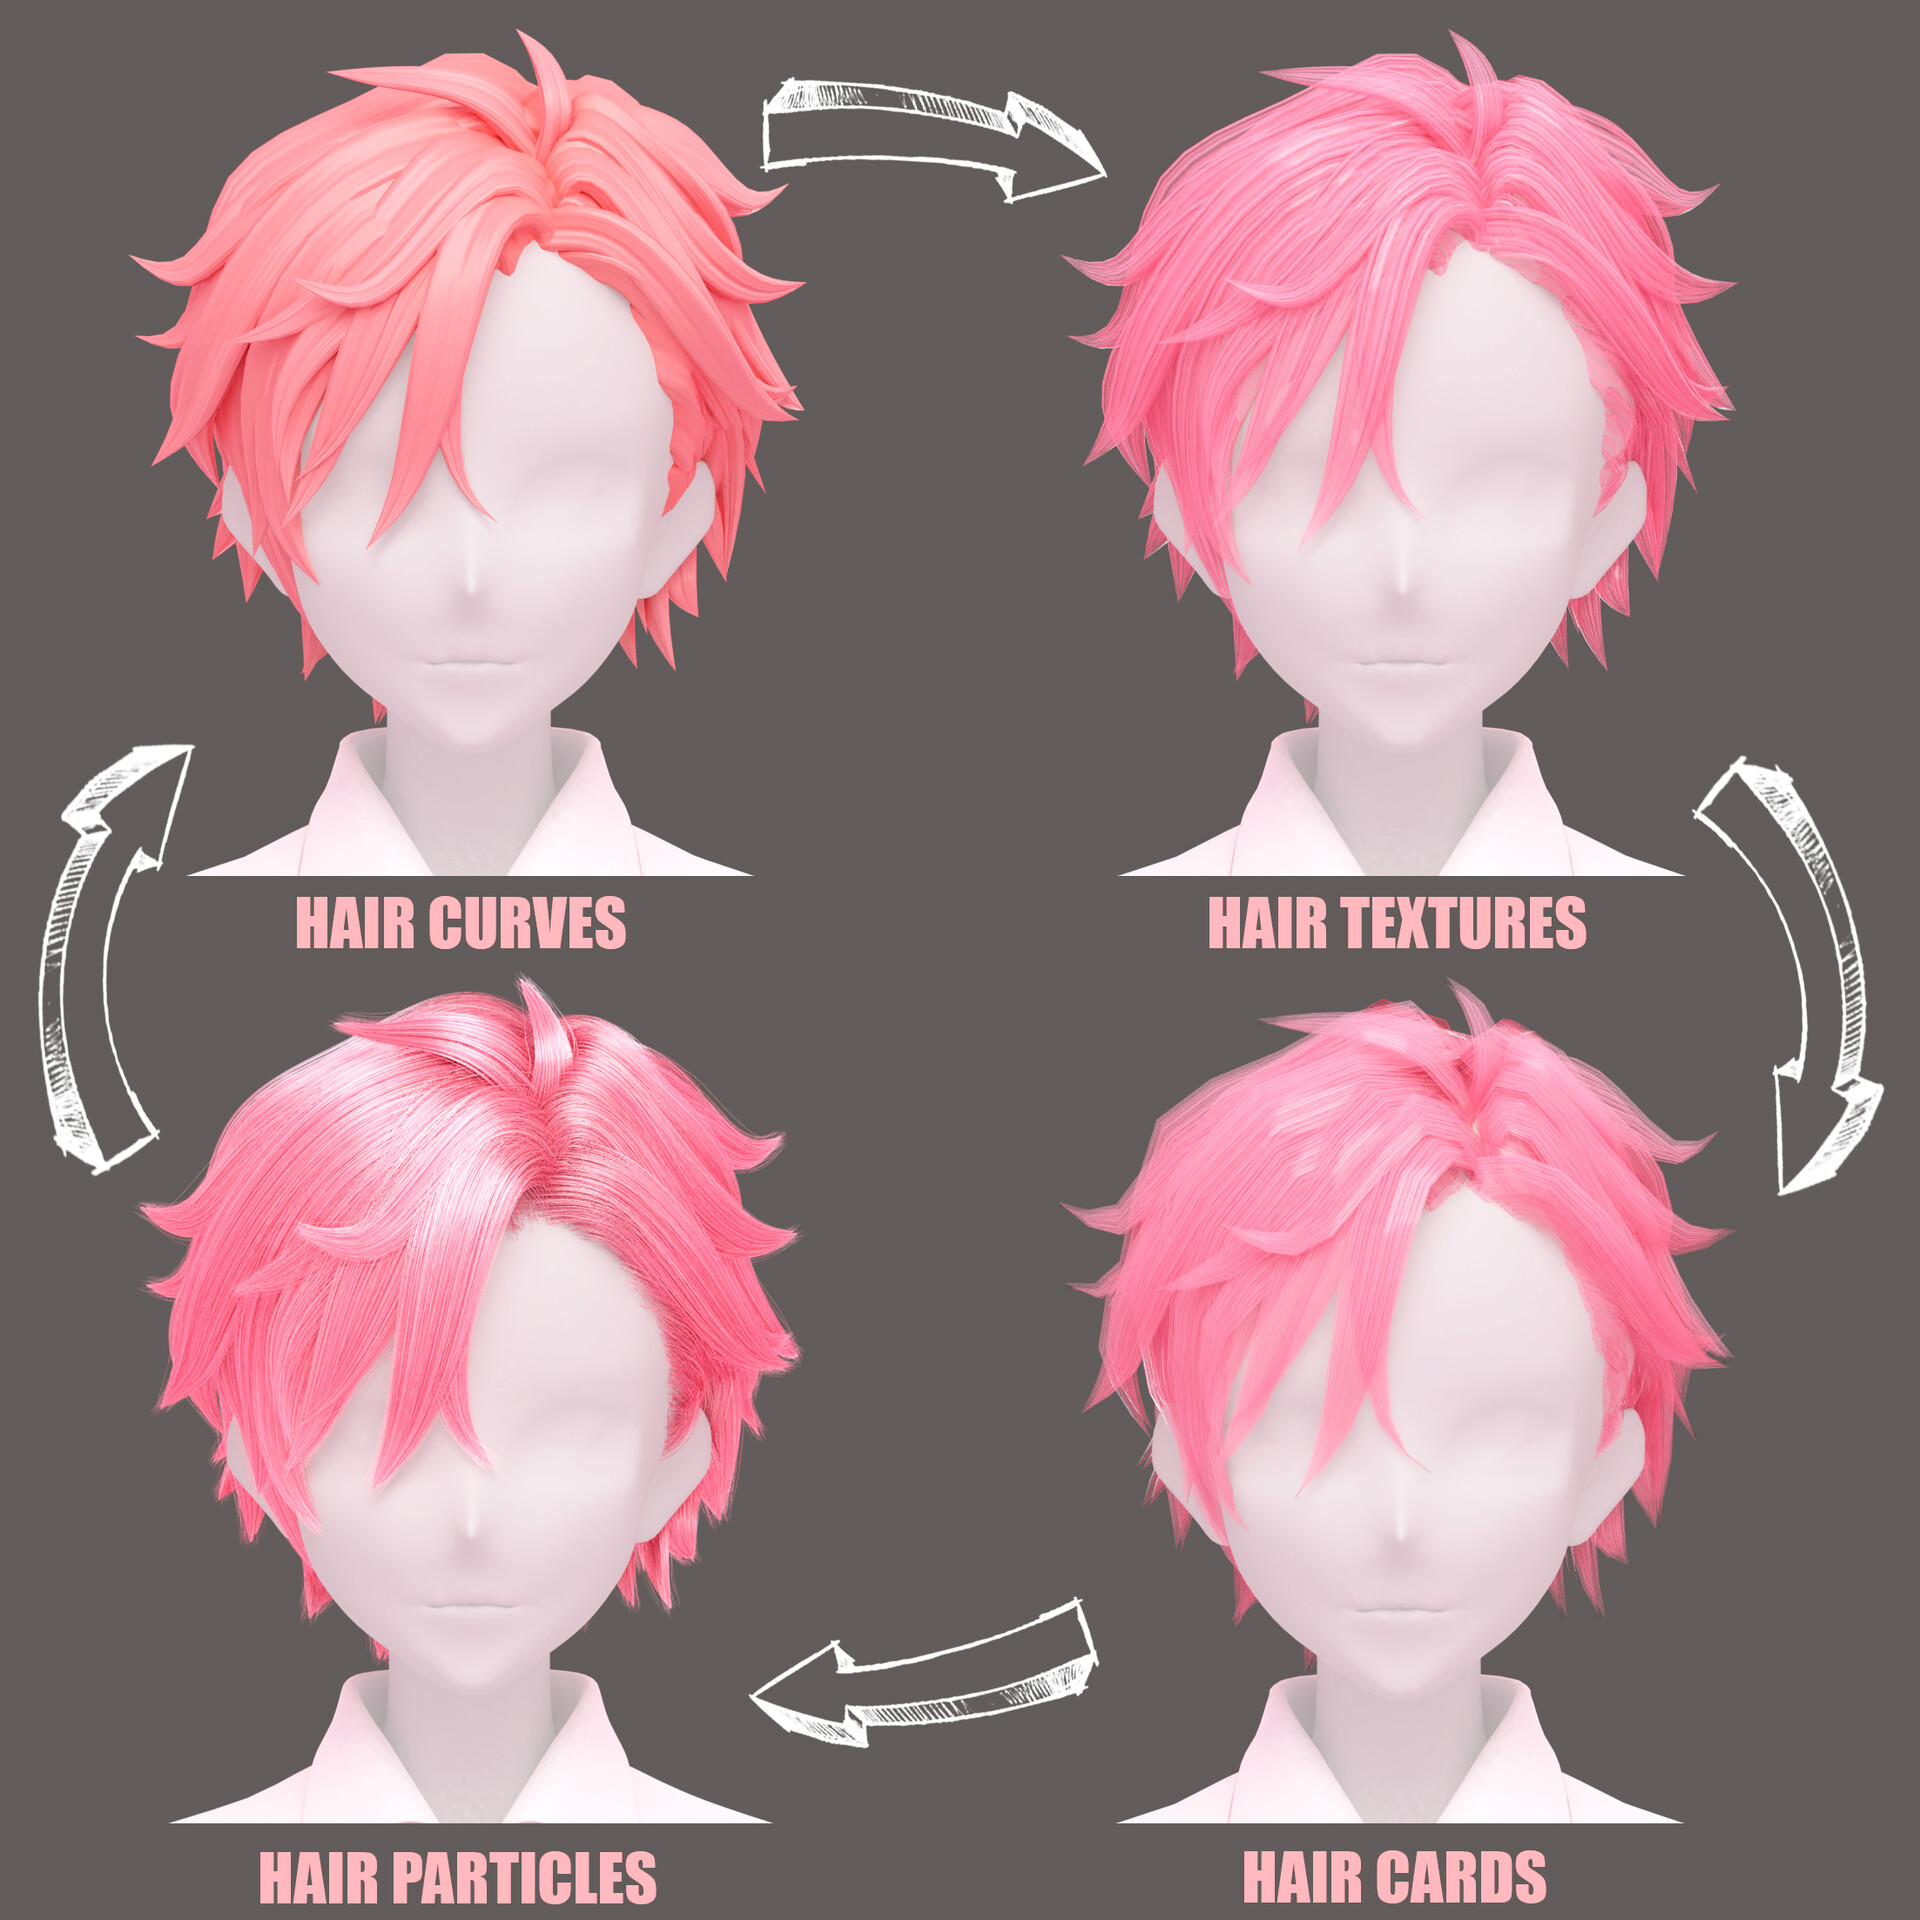 How To Draw Male Hairstyle - Cartoon With Dreads Transparent Transparent  PNG - 1000x642 - Free Download on NicePNG